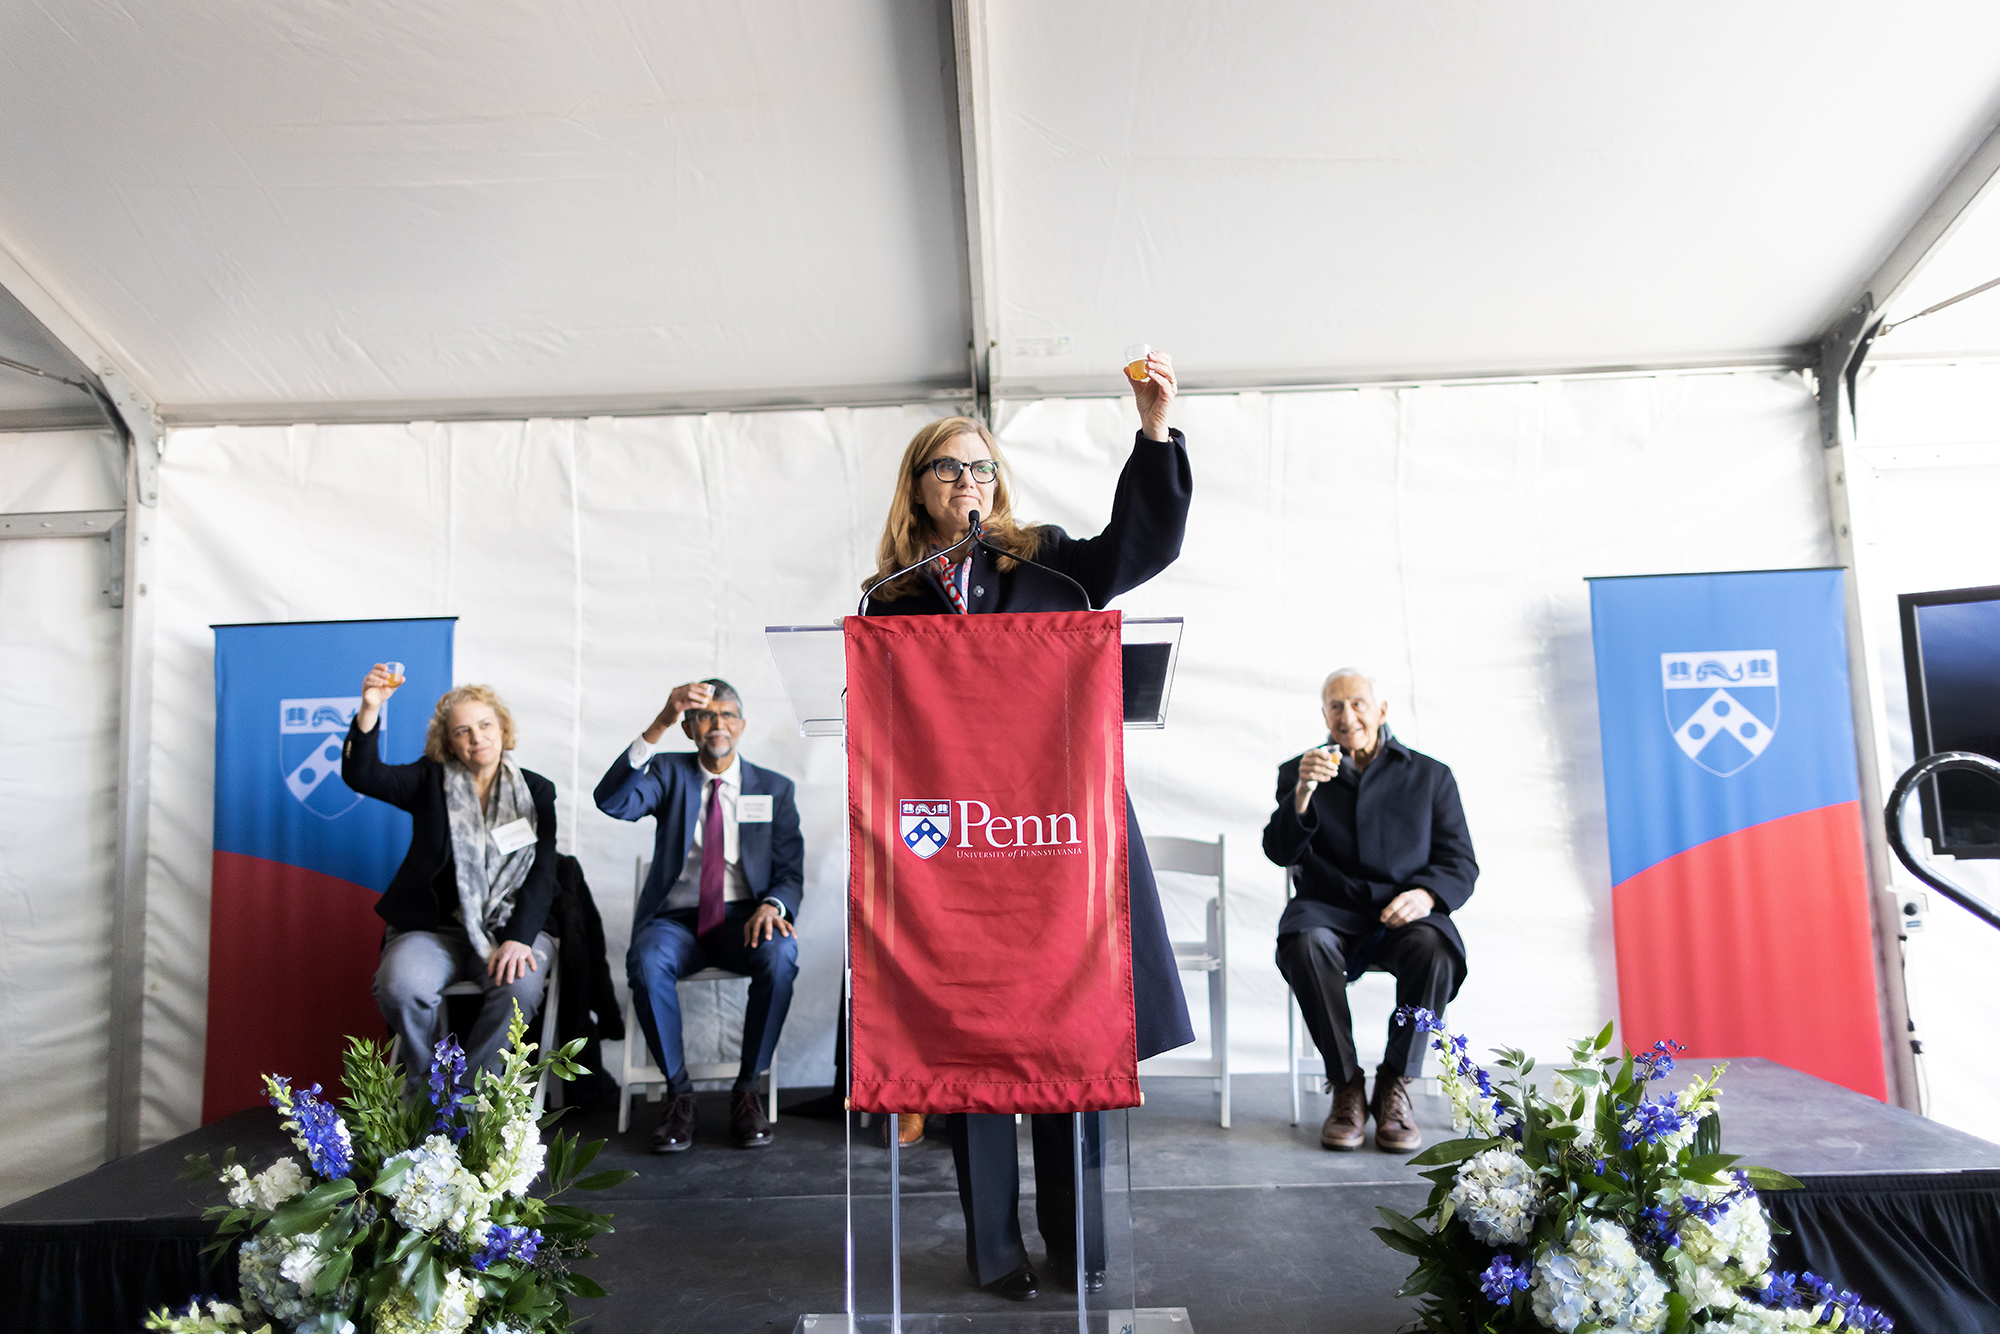 Penn President raises a glass in a toast while speaking at a podium at the Vagelos topping off ceremony.